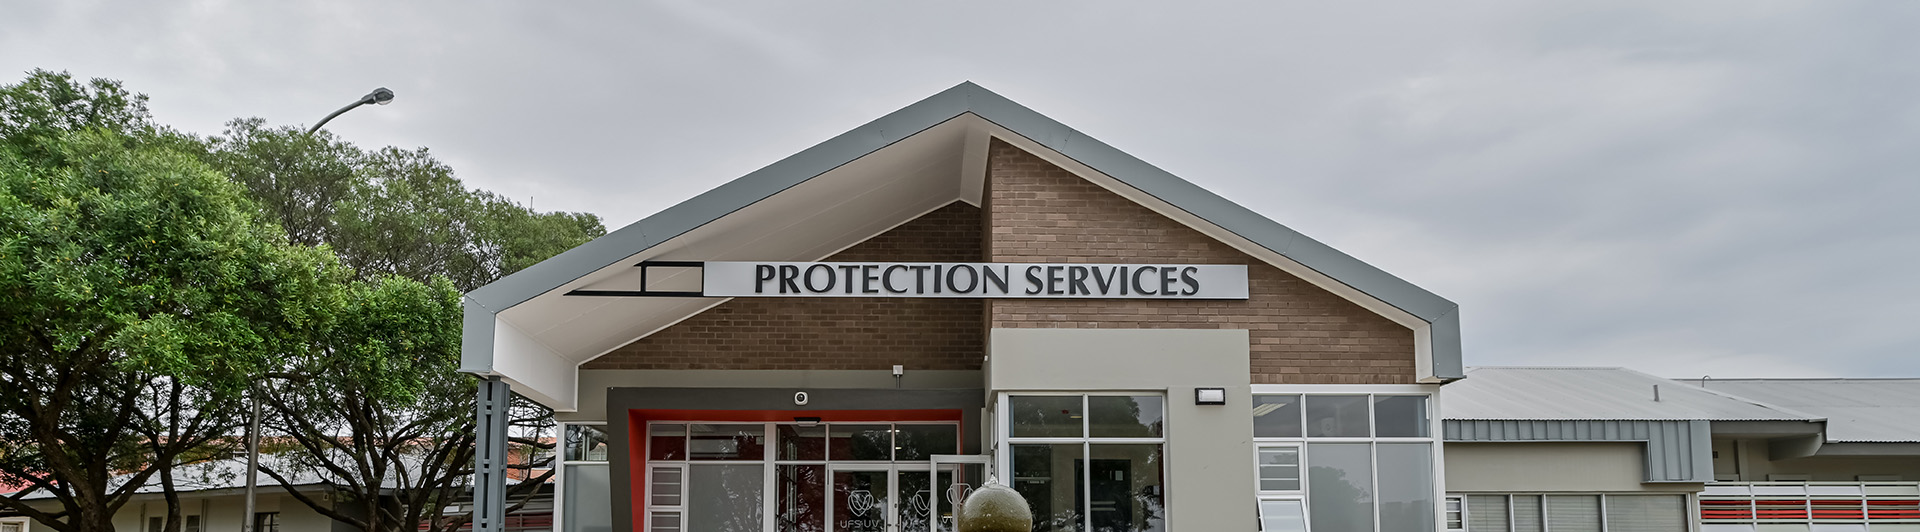 Protection Services